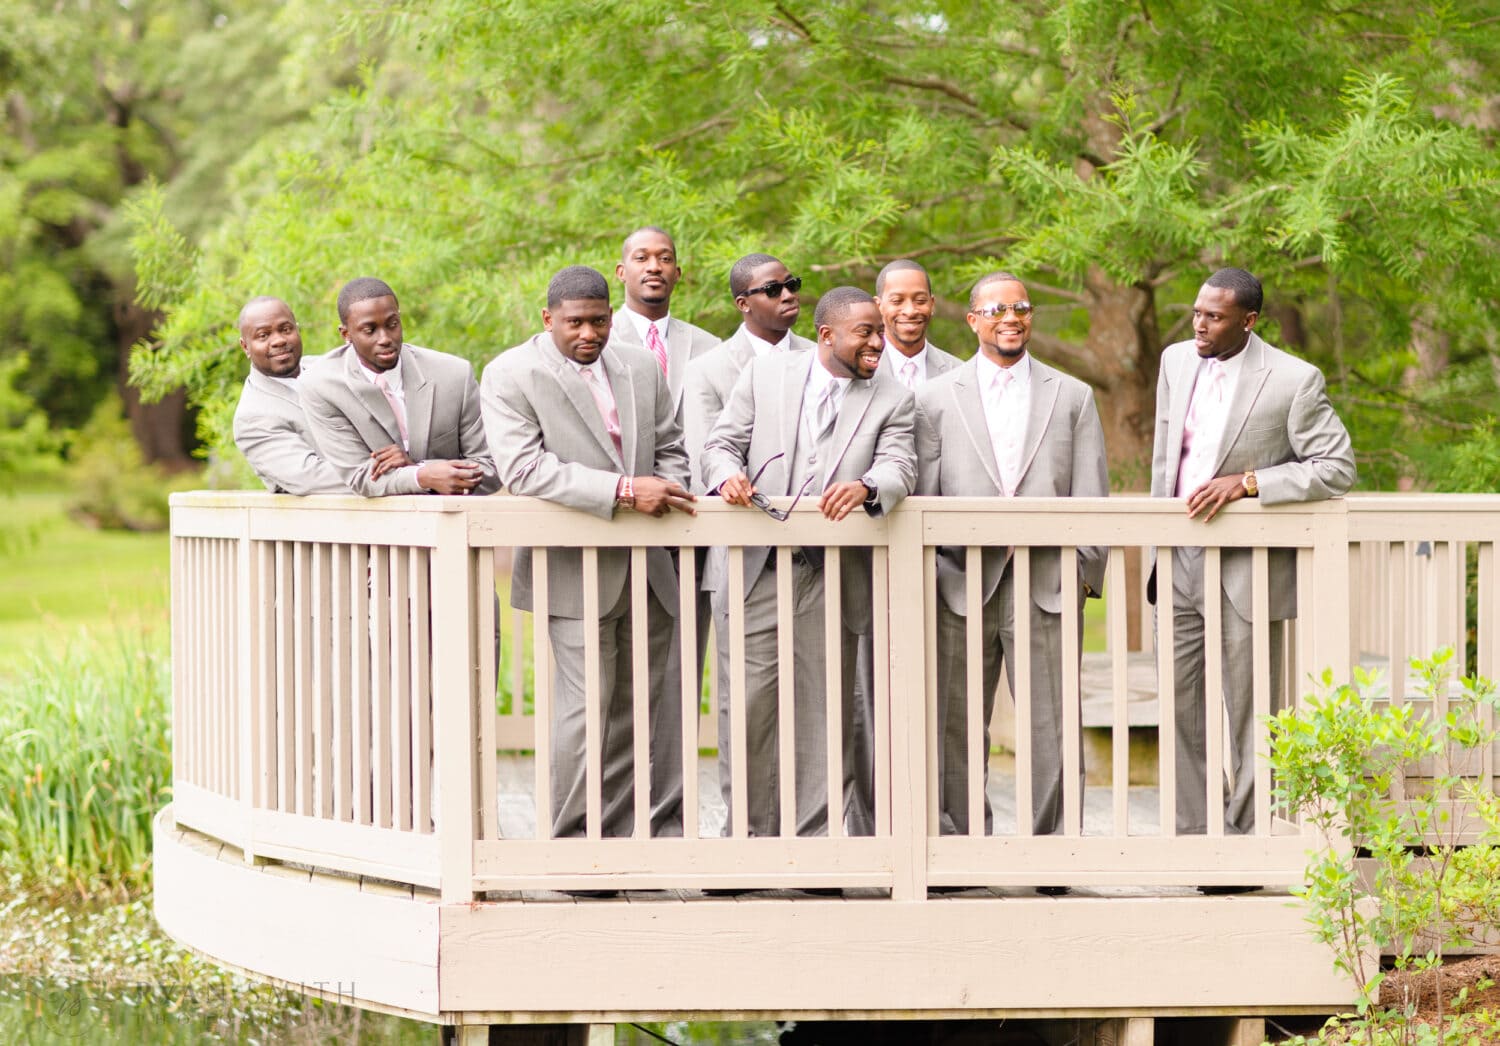 Pictures with the groomsmen before the ceremony - Brookgreen Gardens, Murrells Inlet, SC